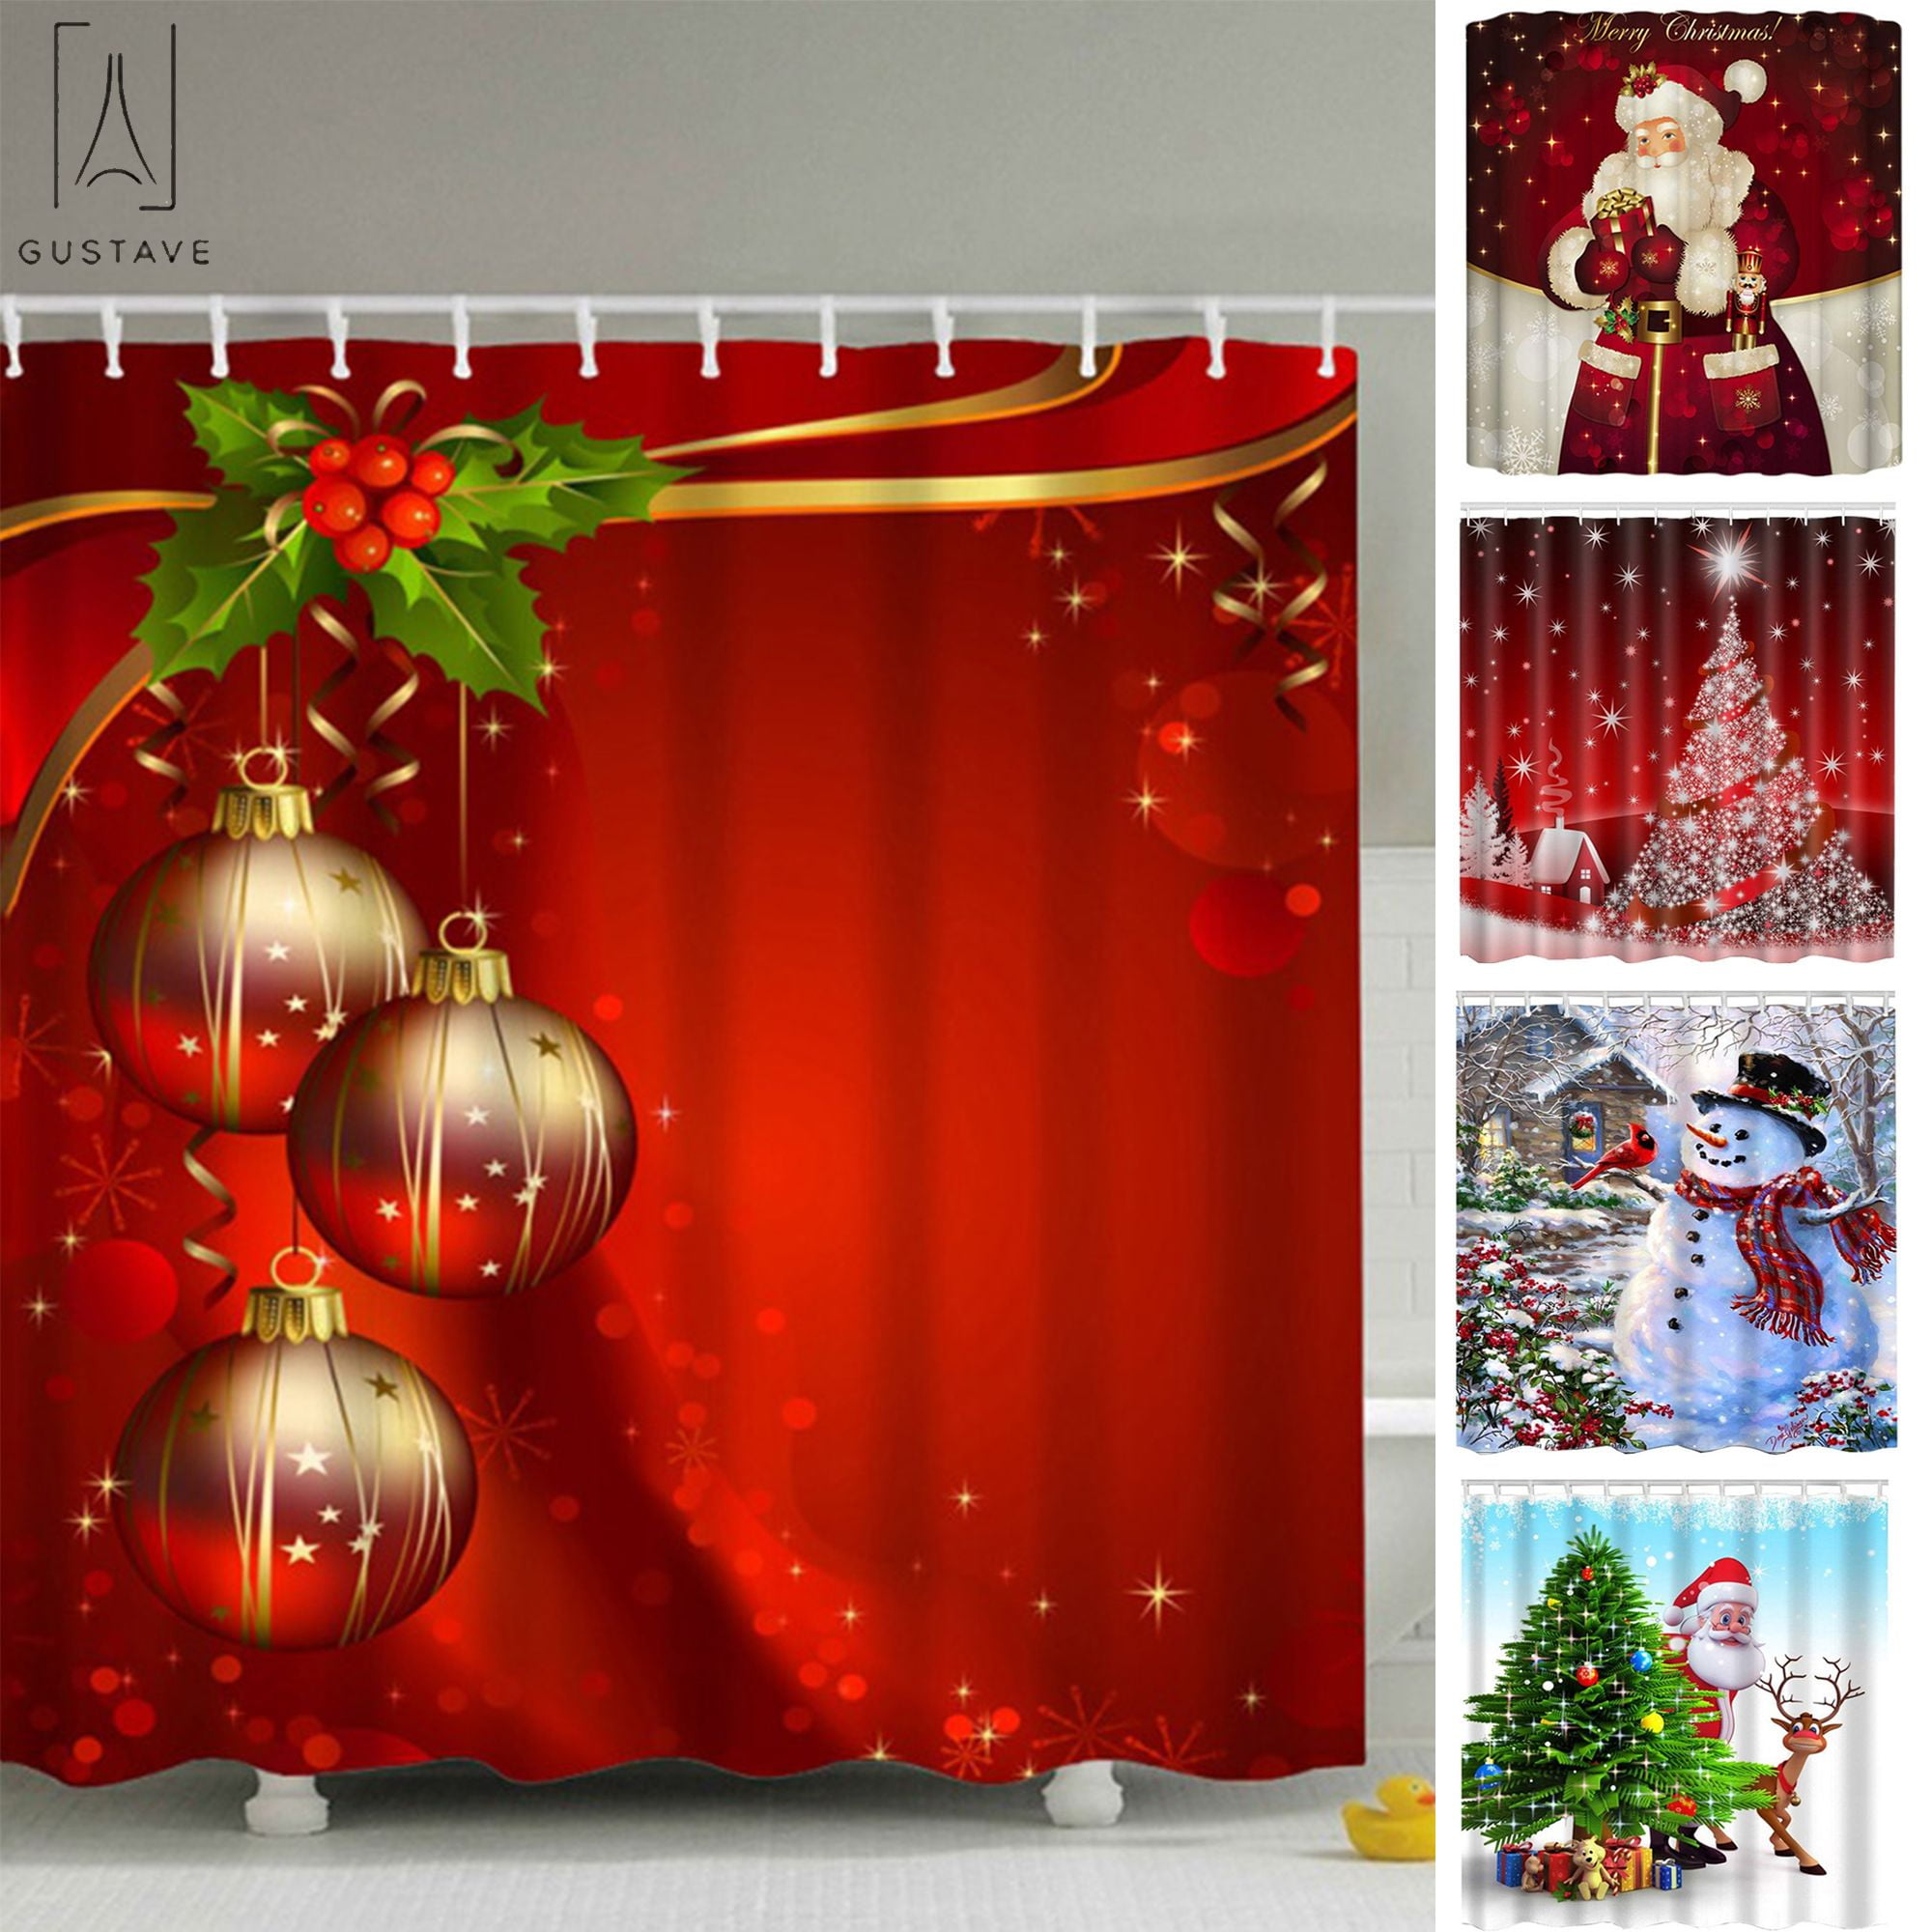 Gustave Christmas Shower Curtain Bathroom Accessories, 70.8inches x 70 ...